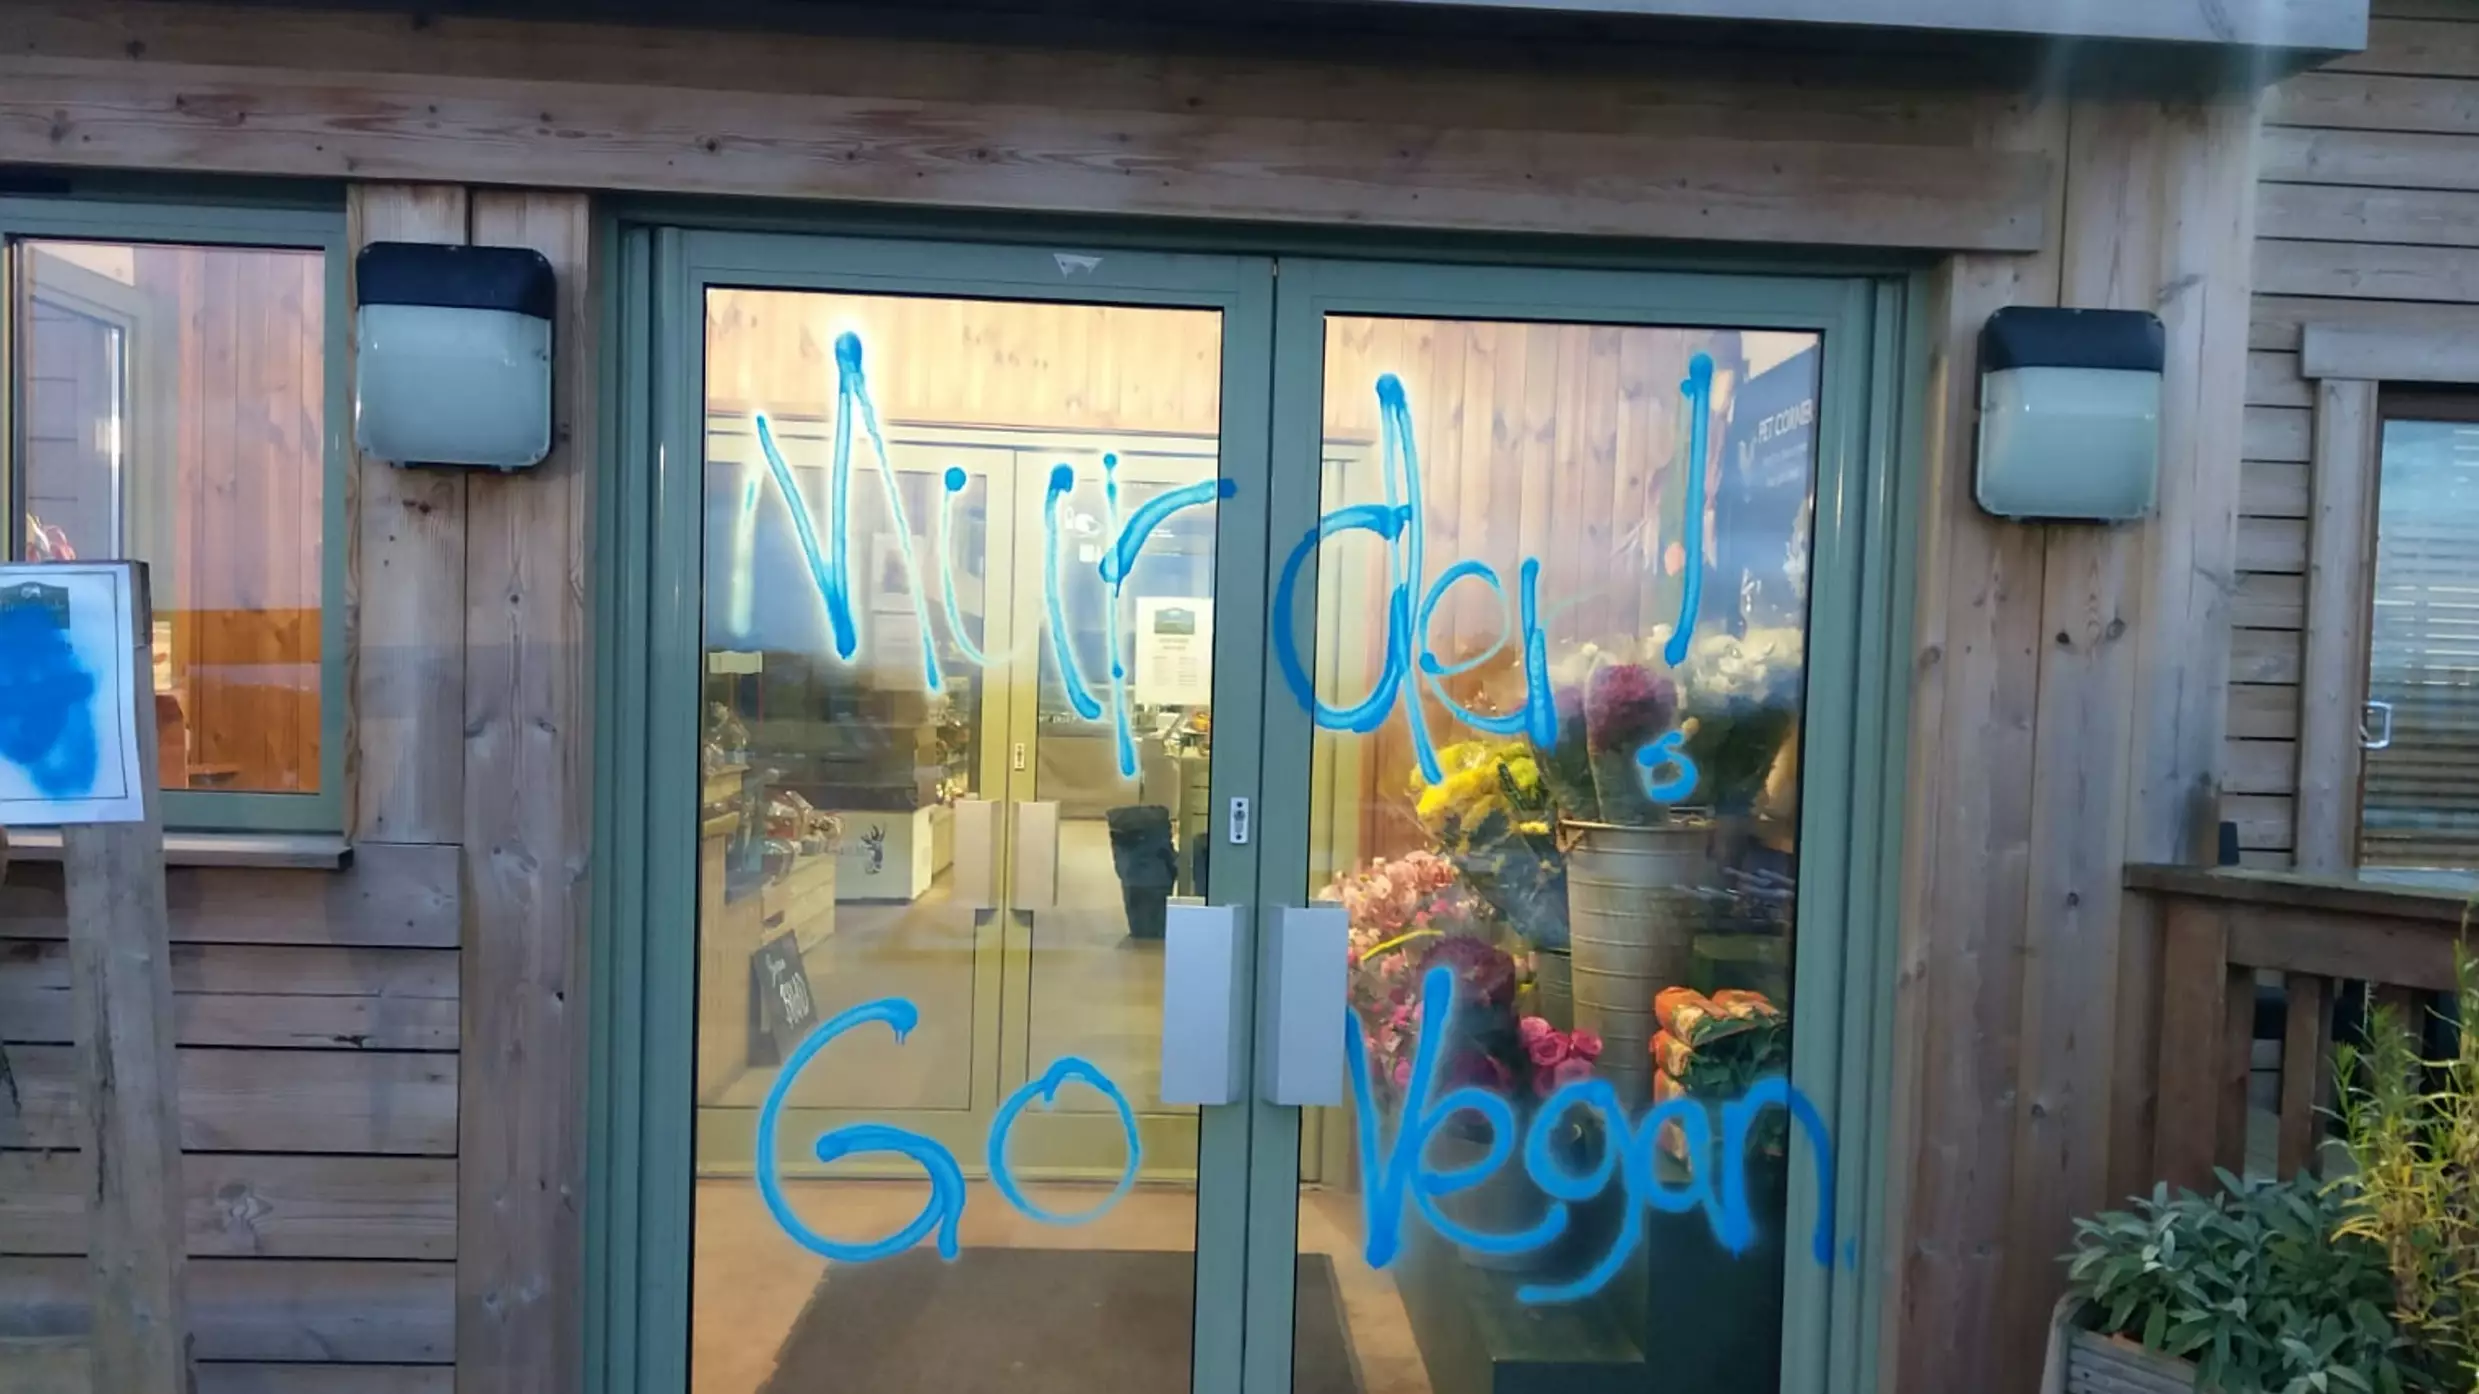 Turkey Farmer Hits Out At 'Militant Vegans' Who Vandalised His Shop